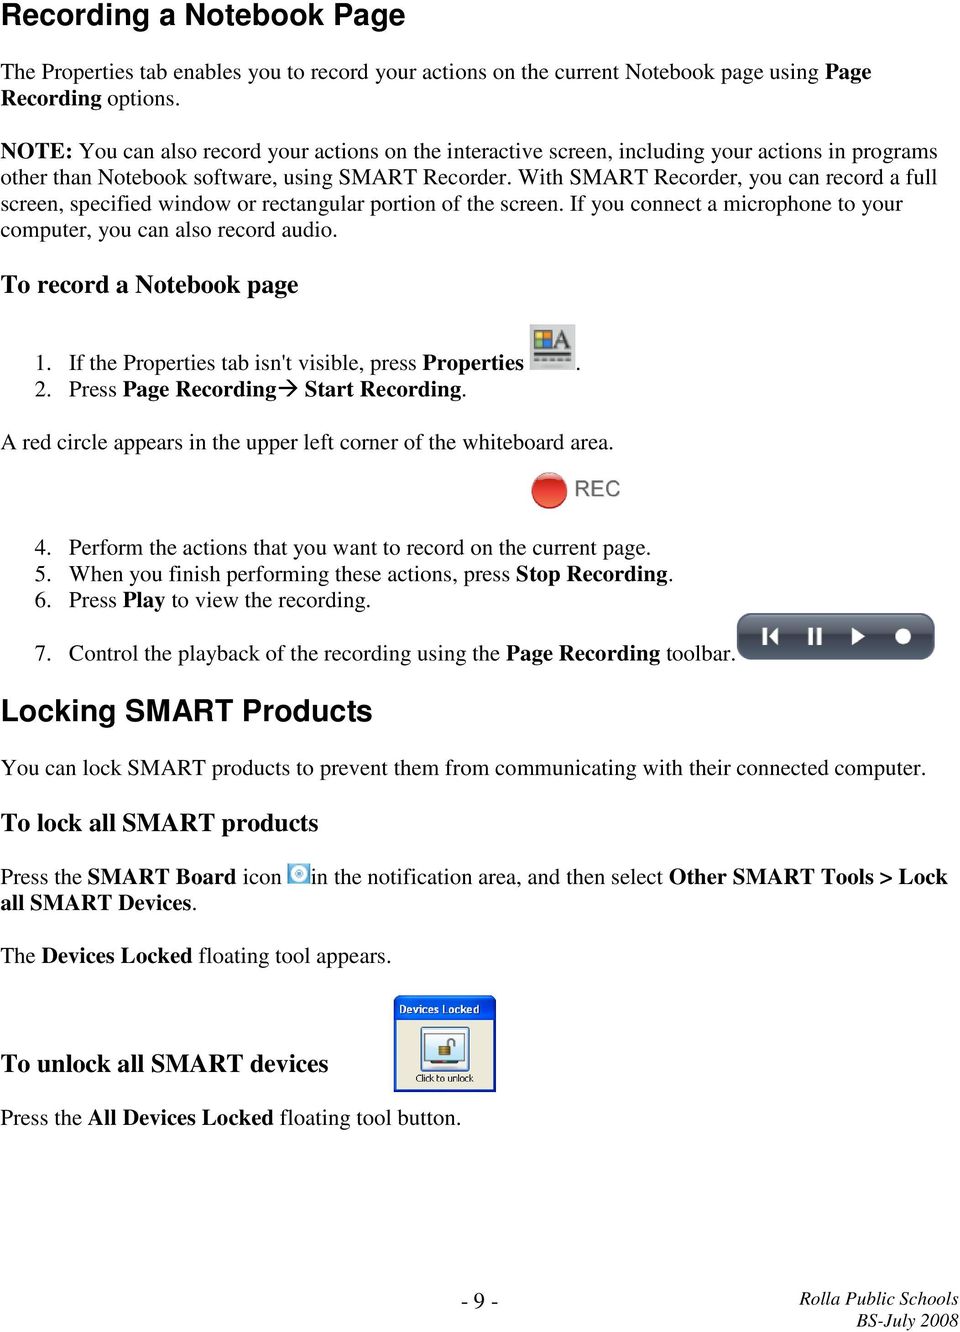 With SMART Recorder, you can record a full screen, specified window or rectangular portion of the screen. If you connect a microphone to your computer, you can also record audio.